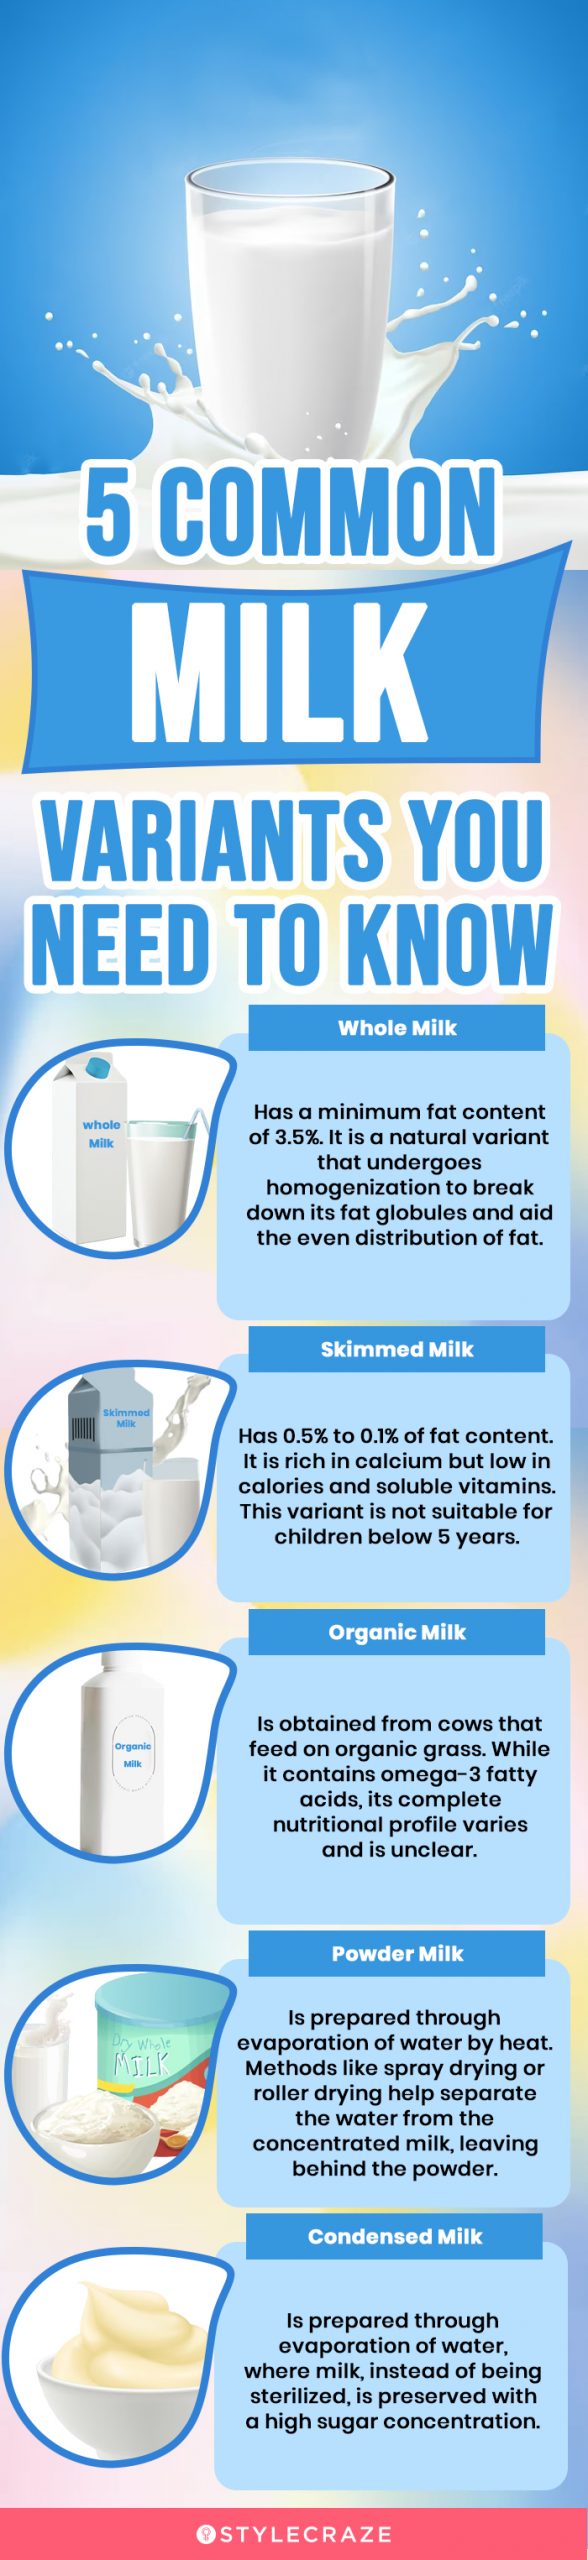 What Type of Milk to Give to Children